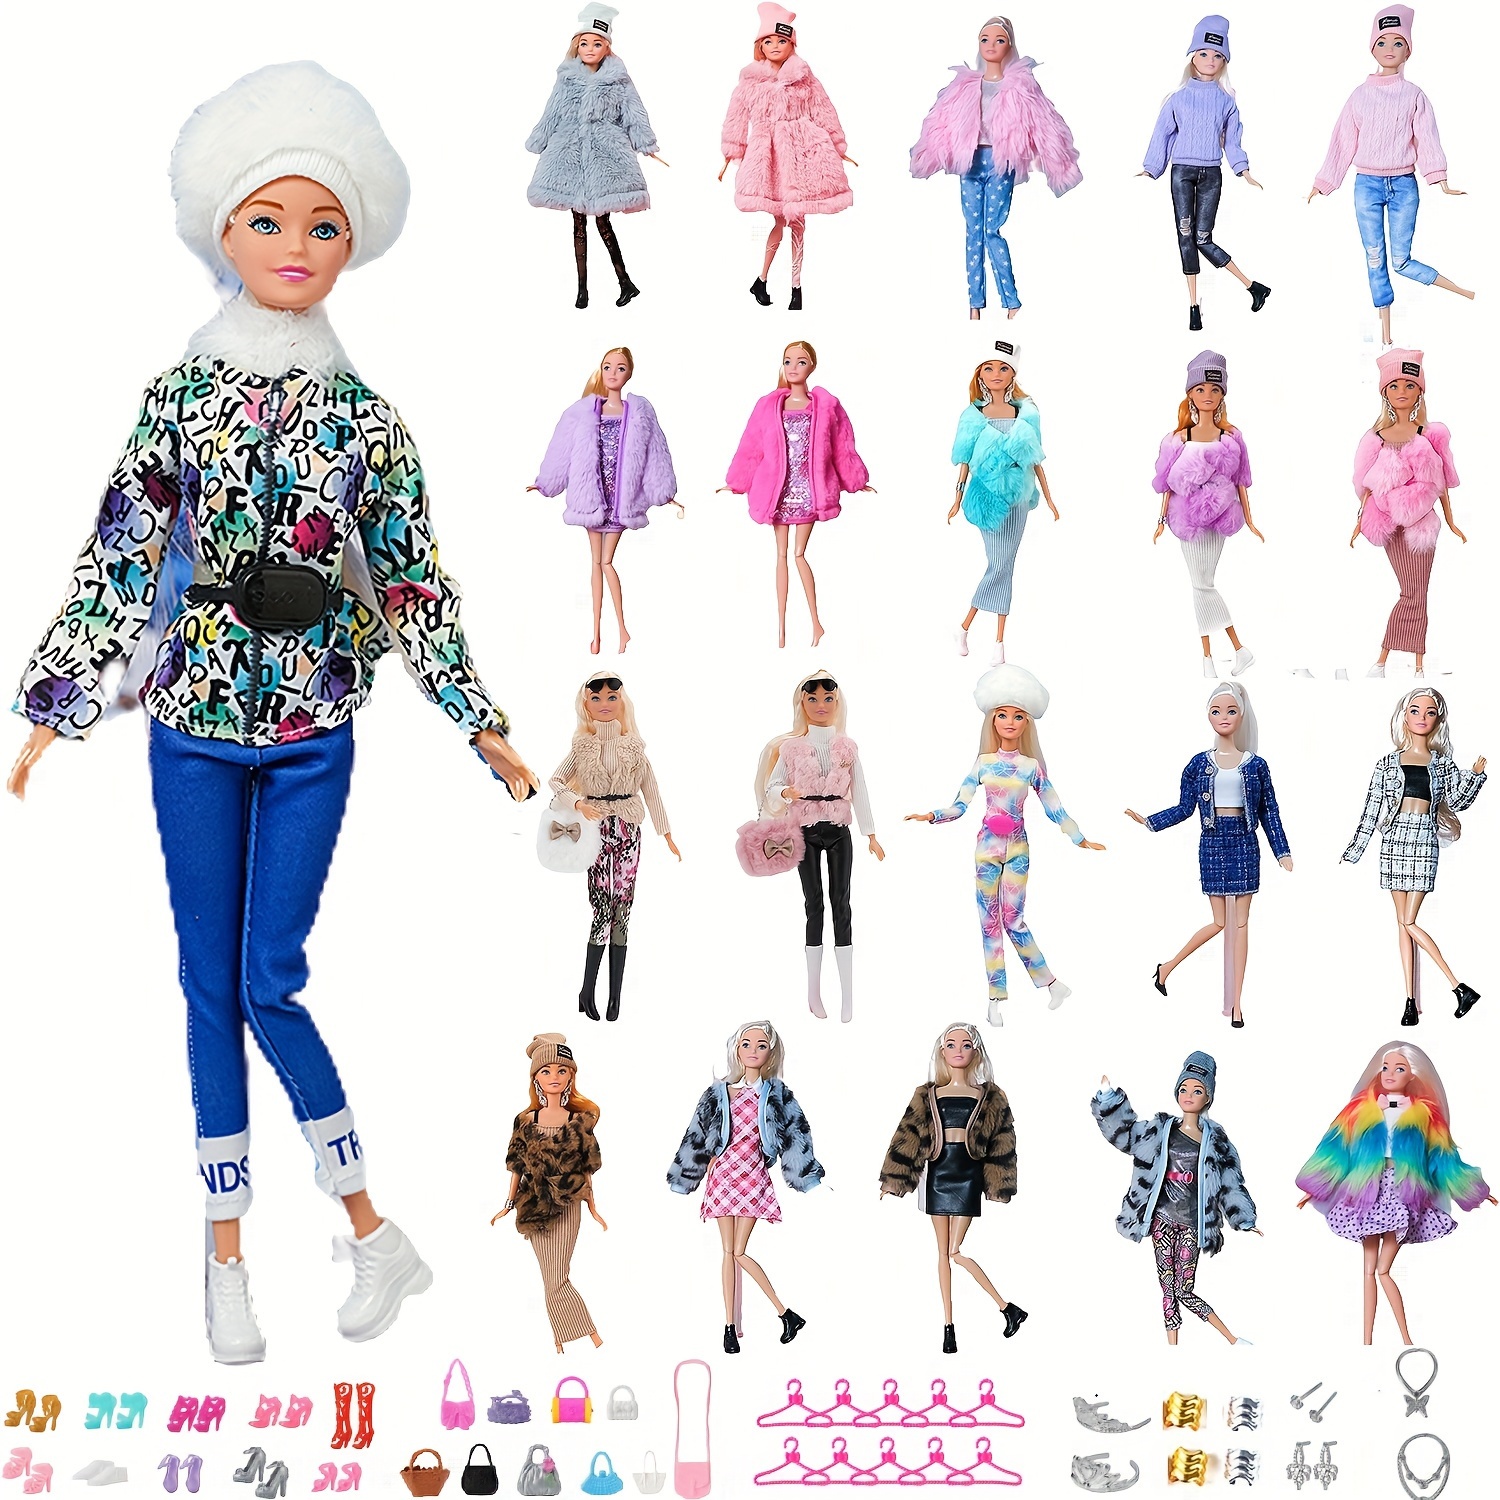 Doll Clothes Accessories Handmade Rainbow Pattern Tops Tight